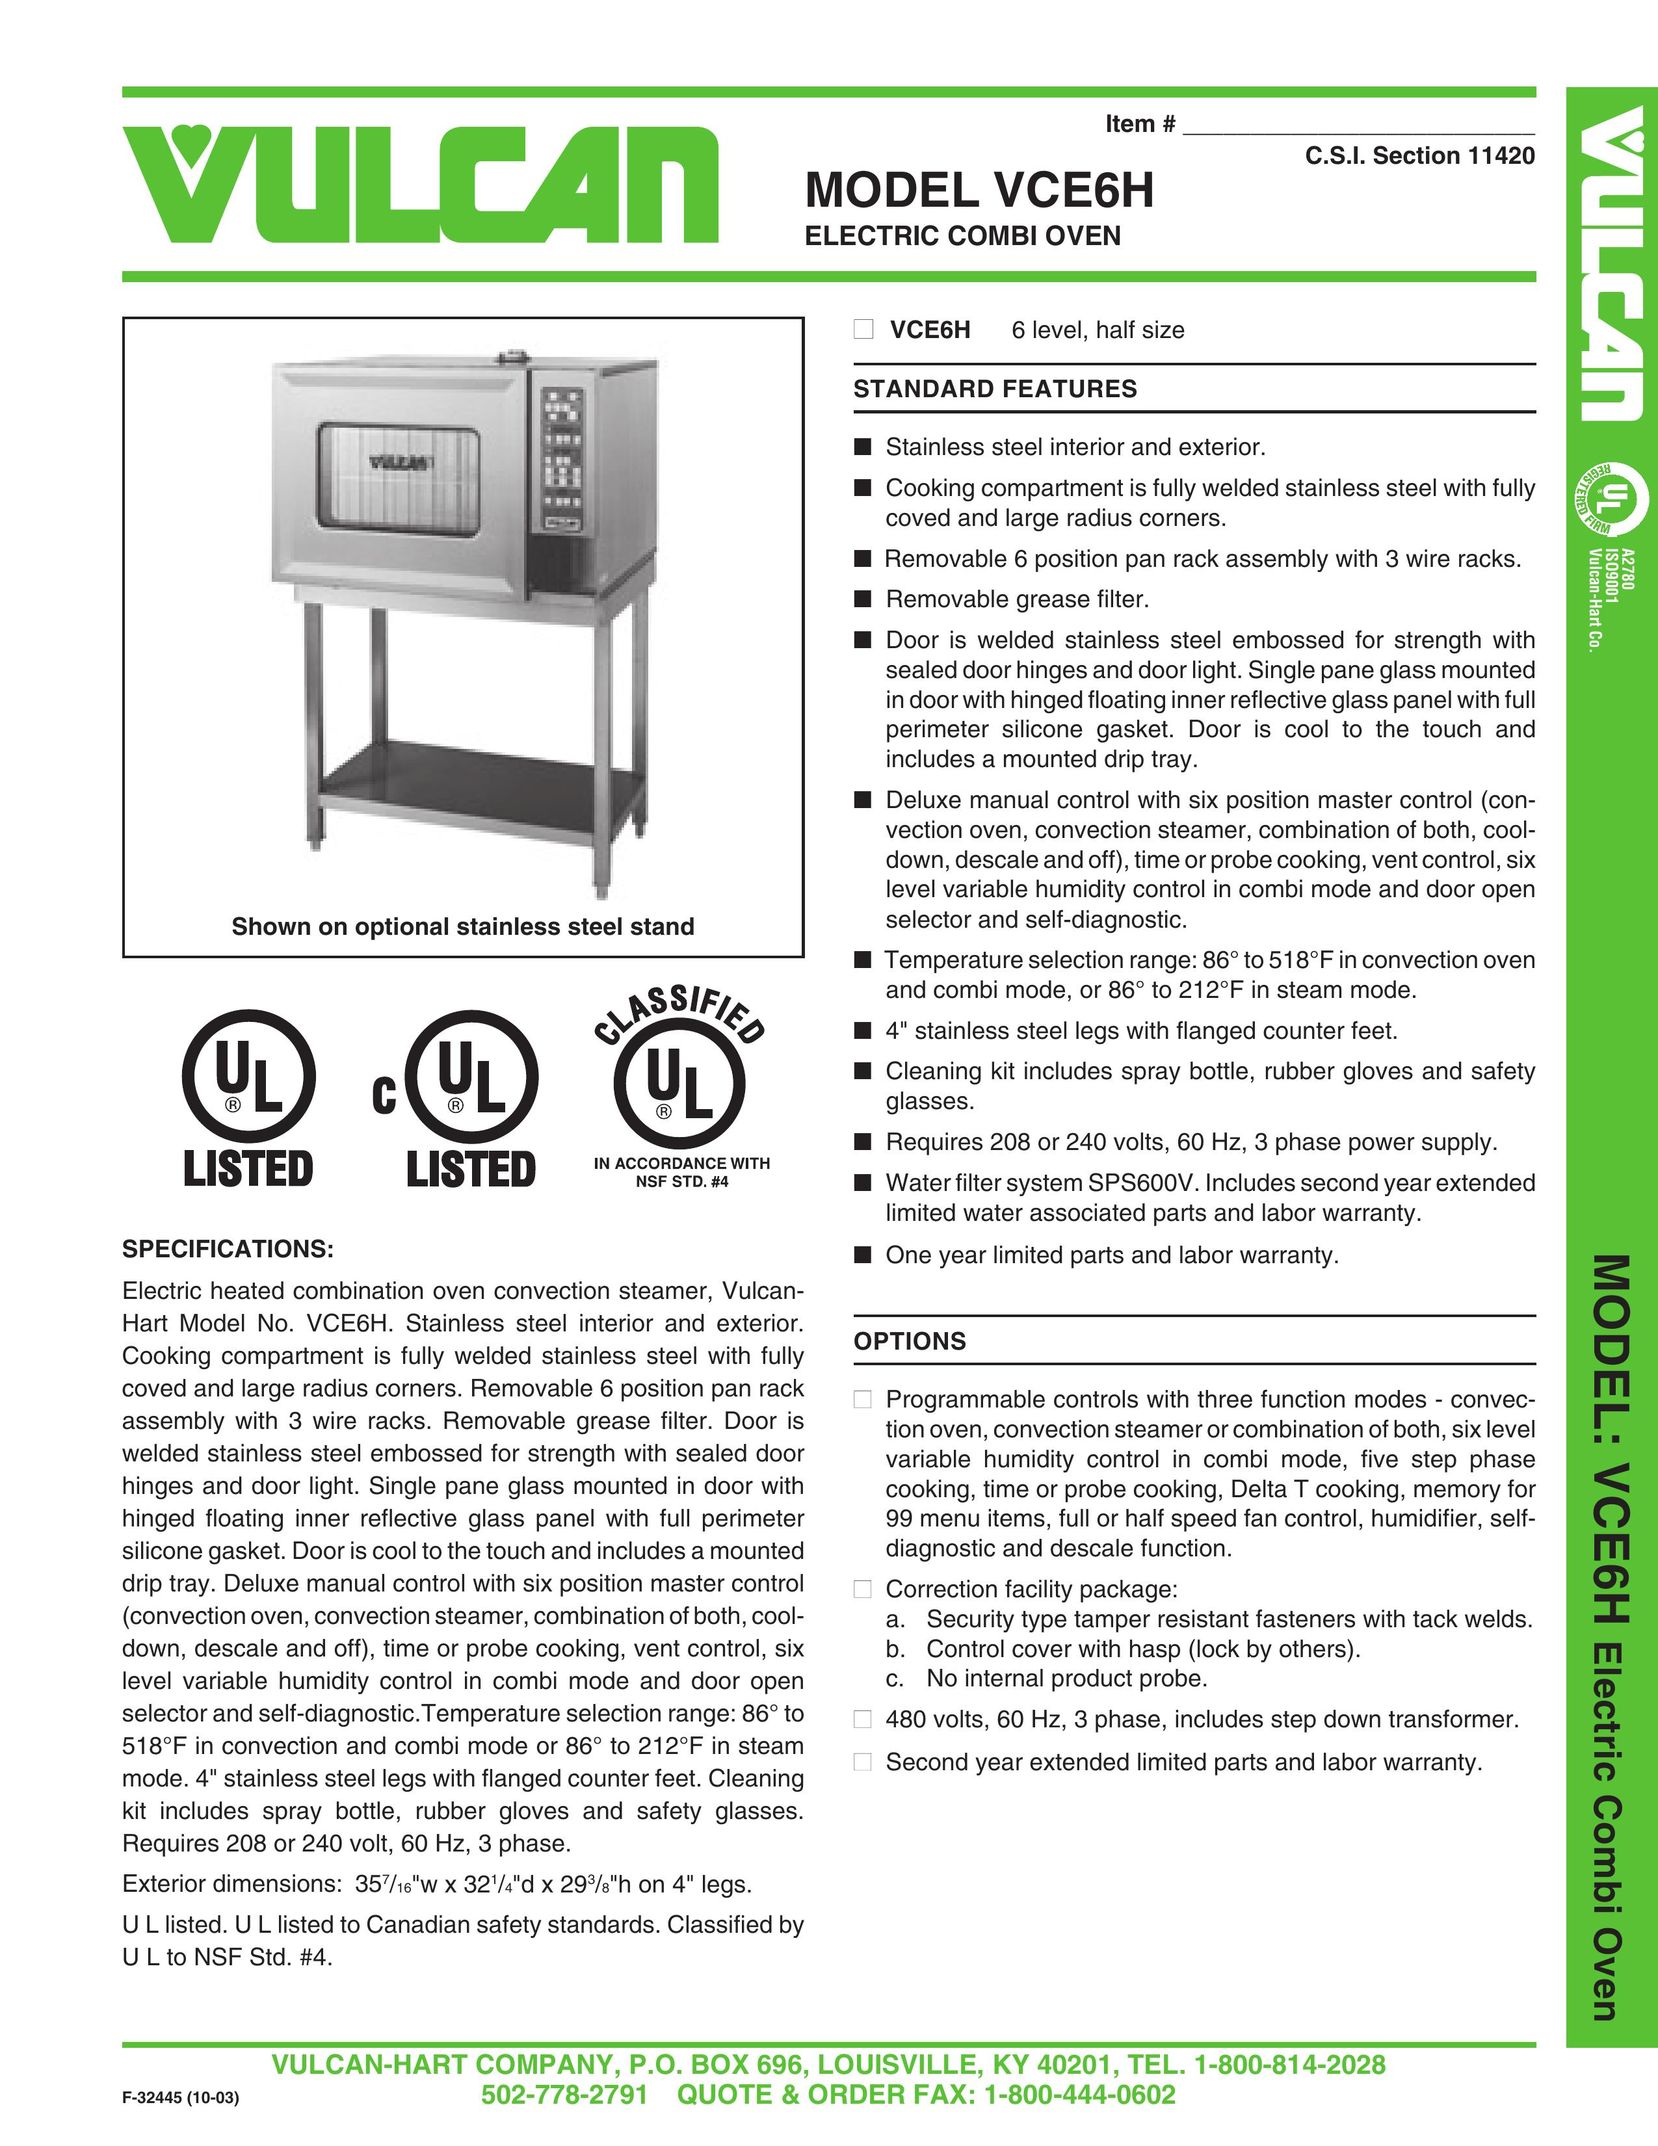 Vulcan-Hart VCE6H Microwave Oven User Manual